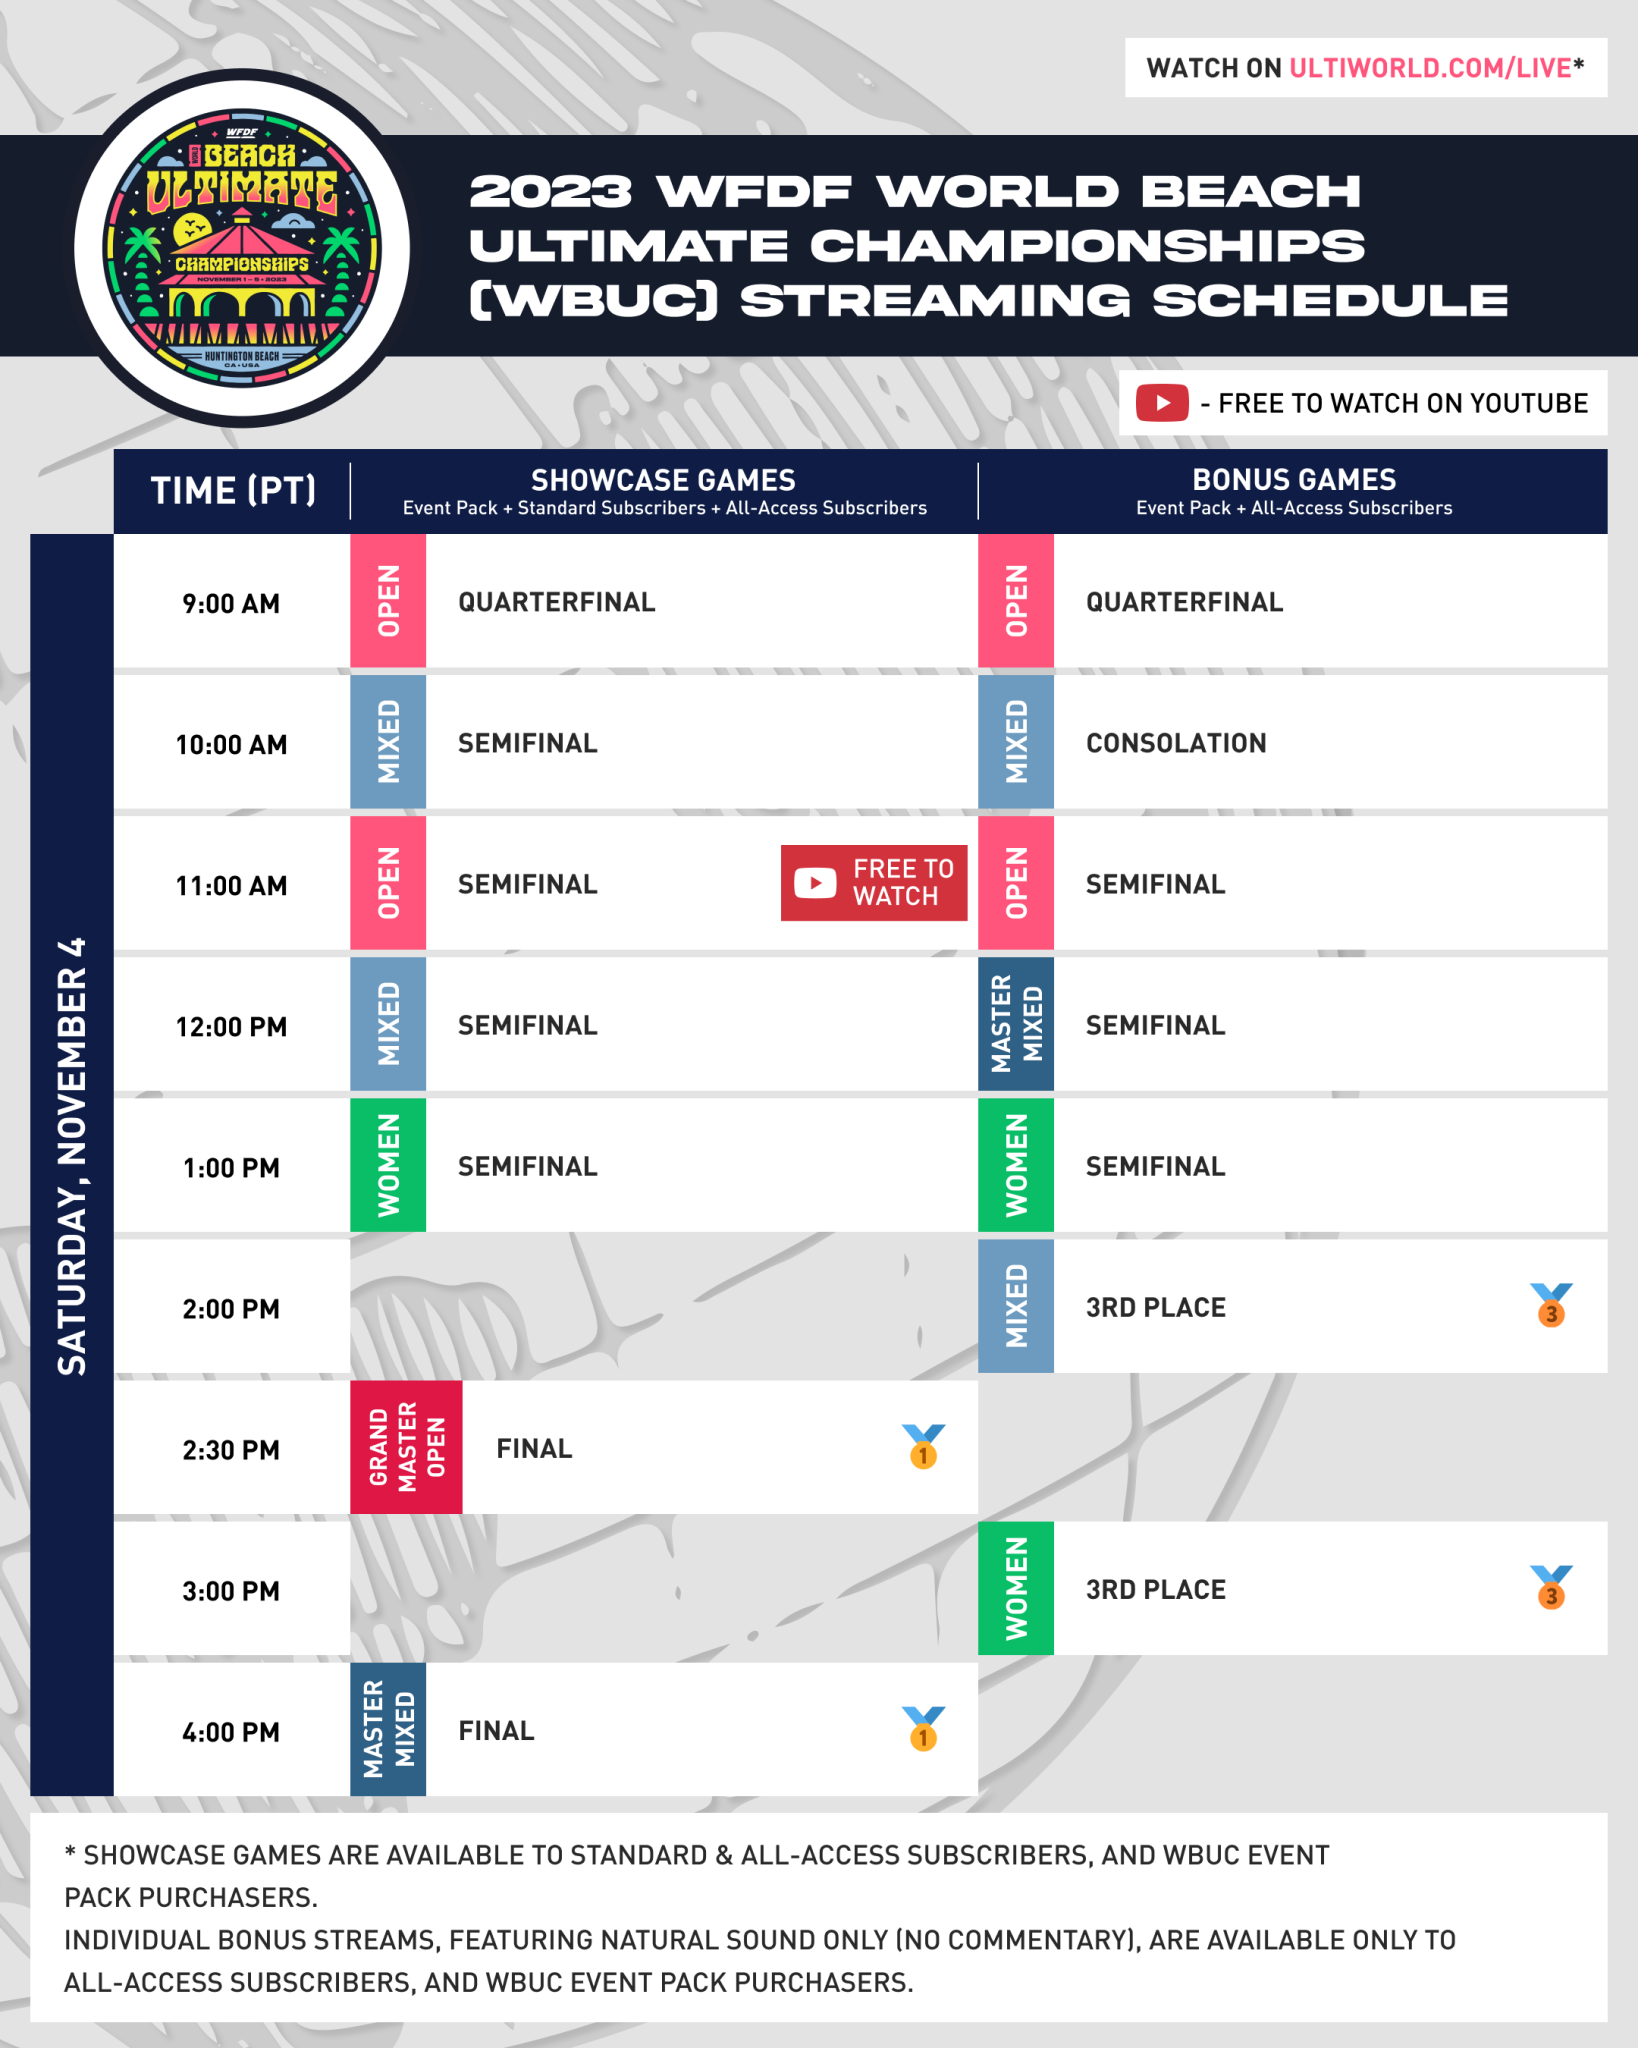 2023 WFDF World Beach Ultimate Championships Streaming Schedule, How